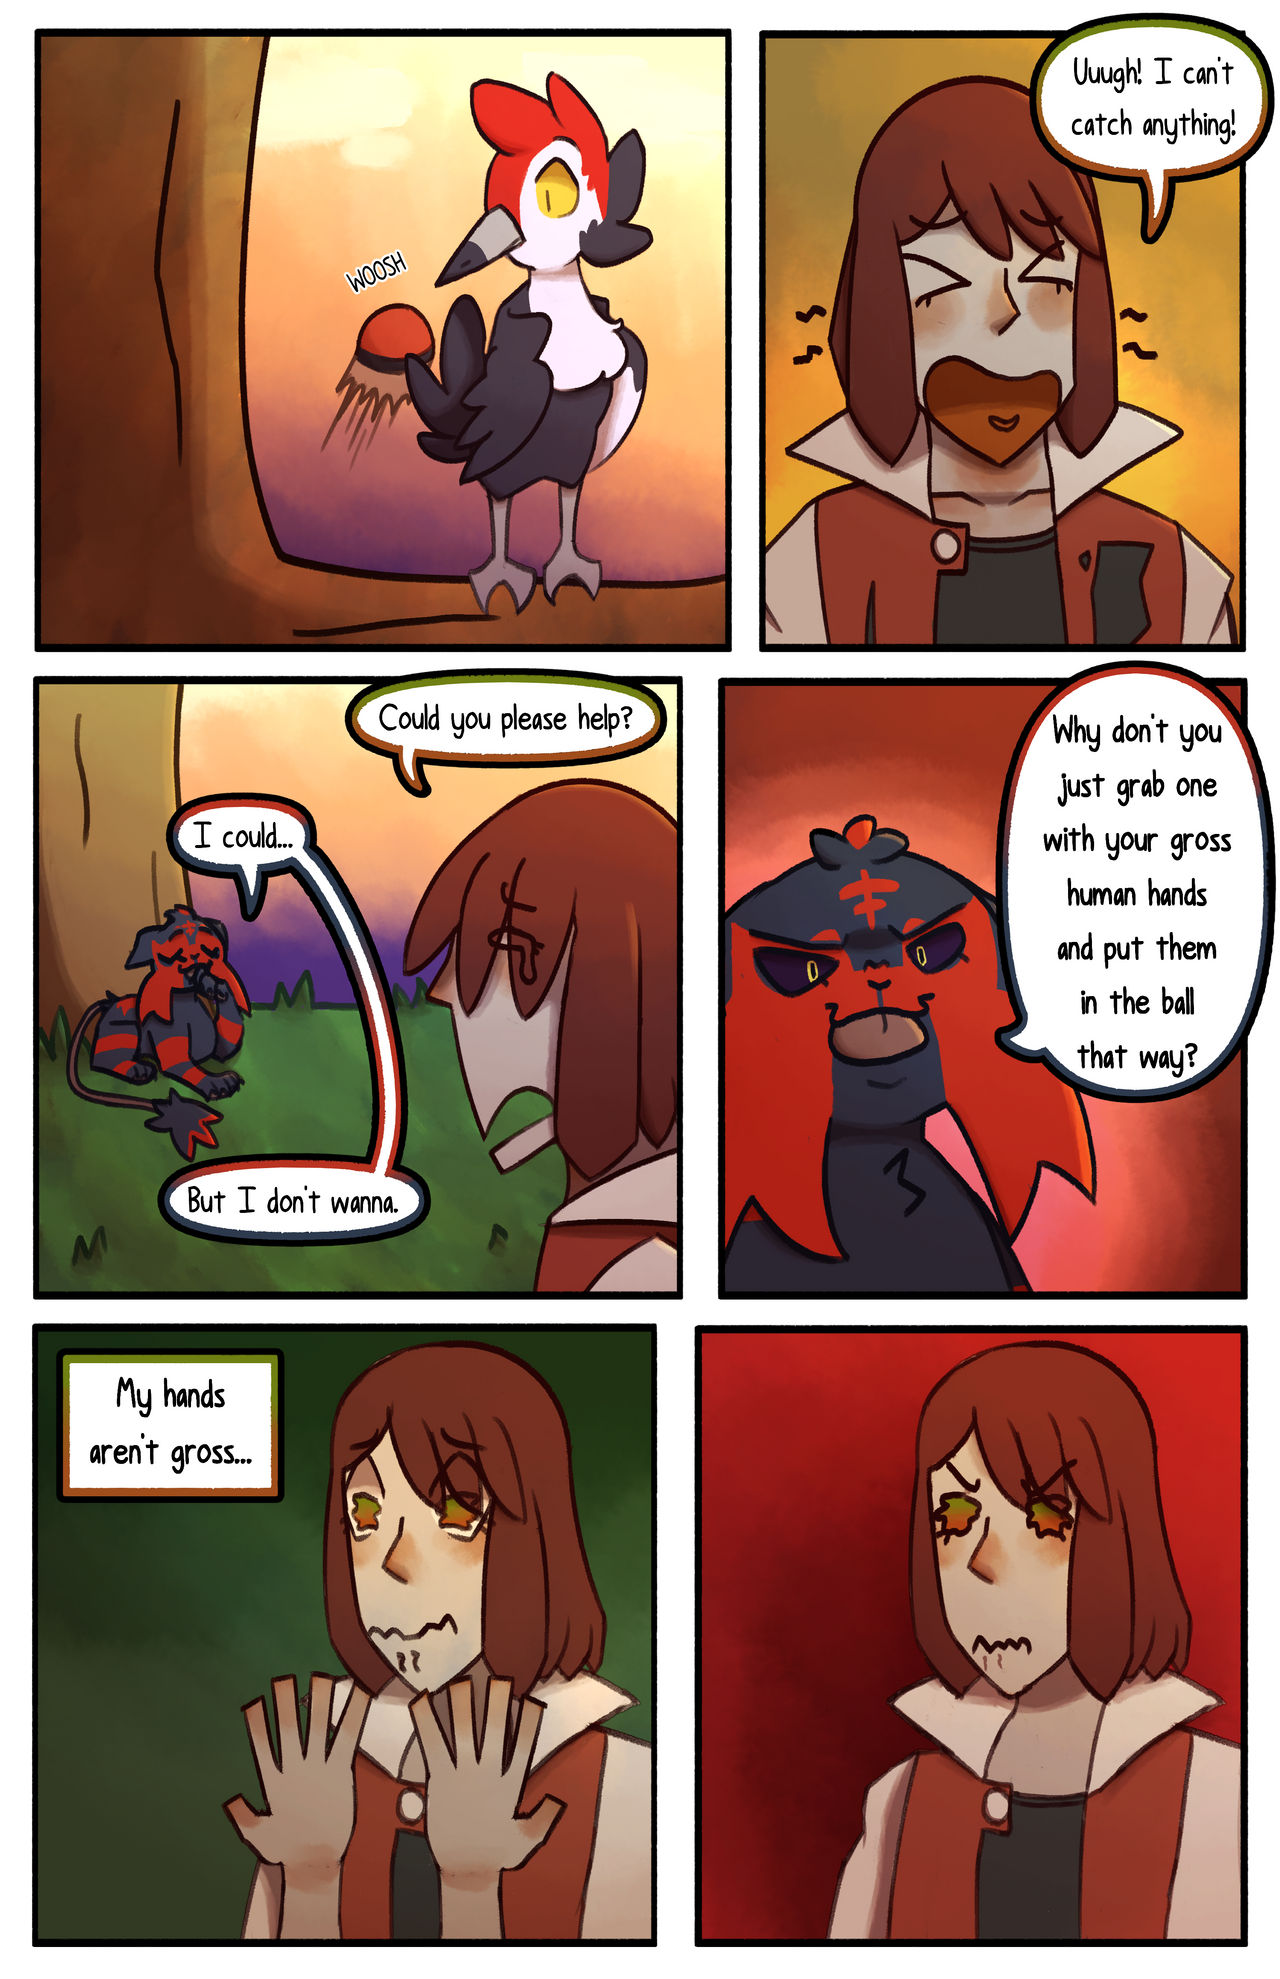 bloom__an_ultra_moon_nuzlocke___chapter_1__page_36_by_zombie_zcorge_dfb6q0b-fullview.jpg